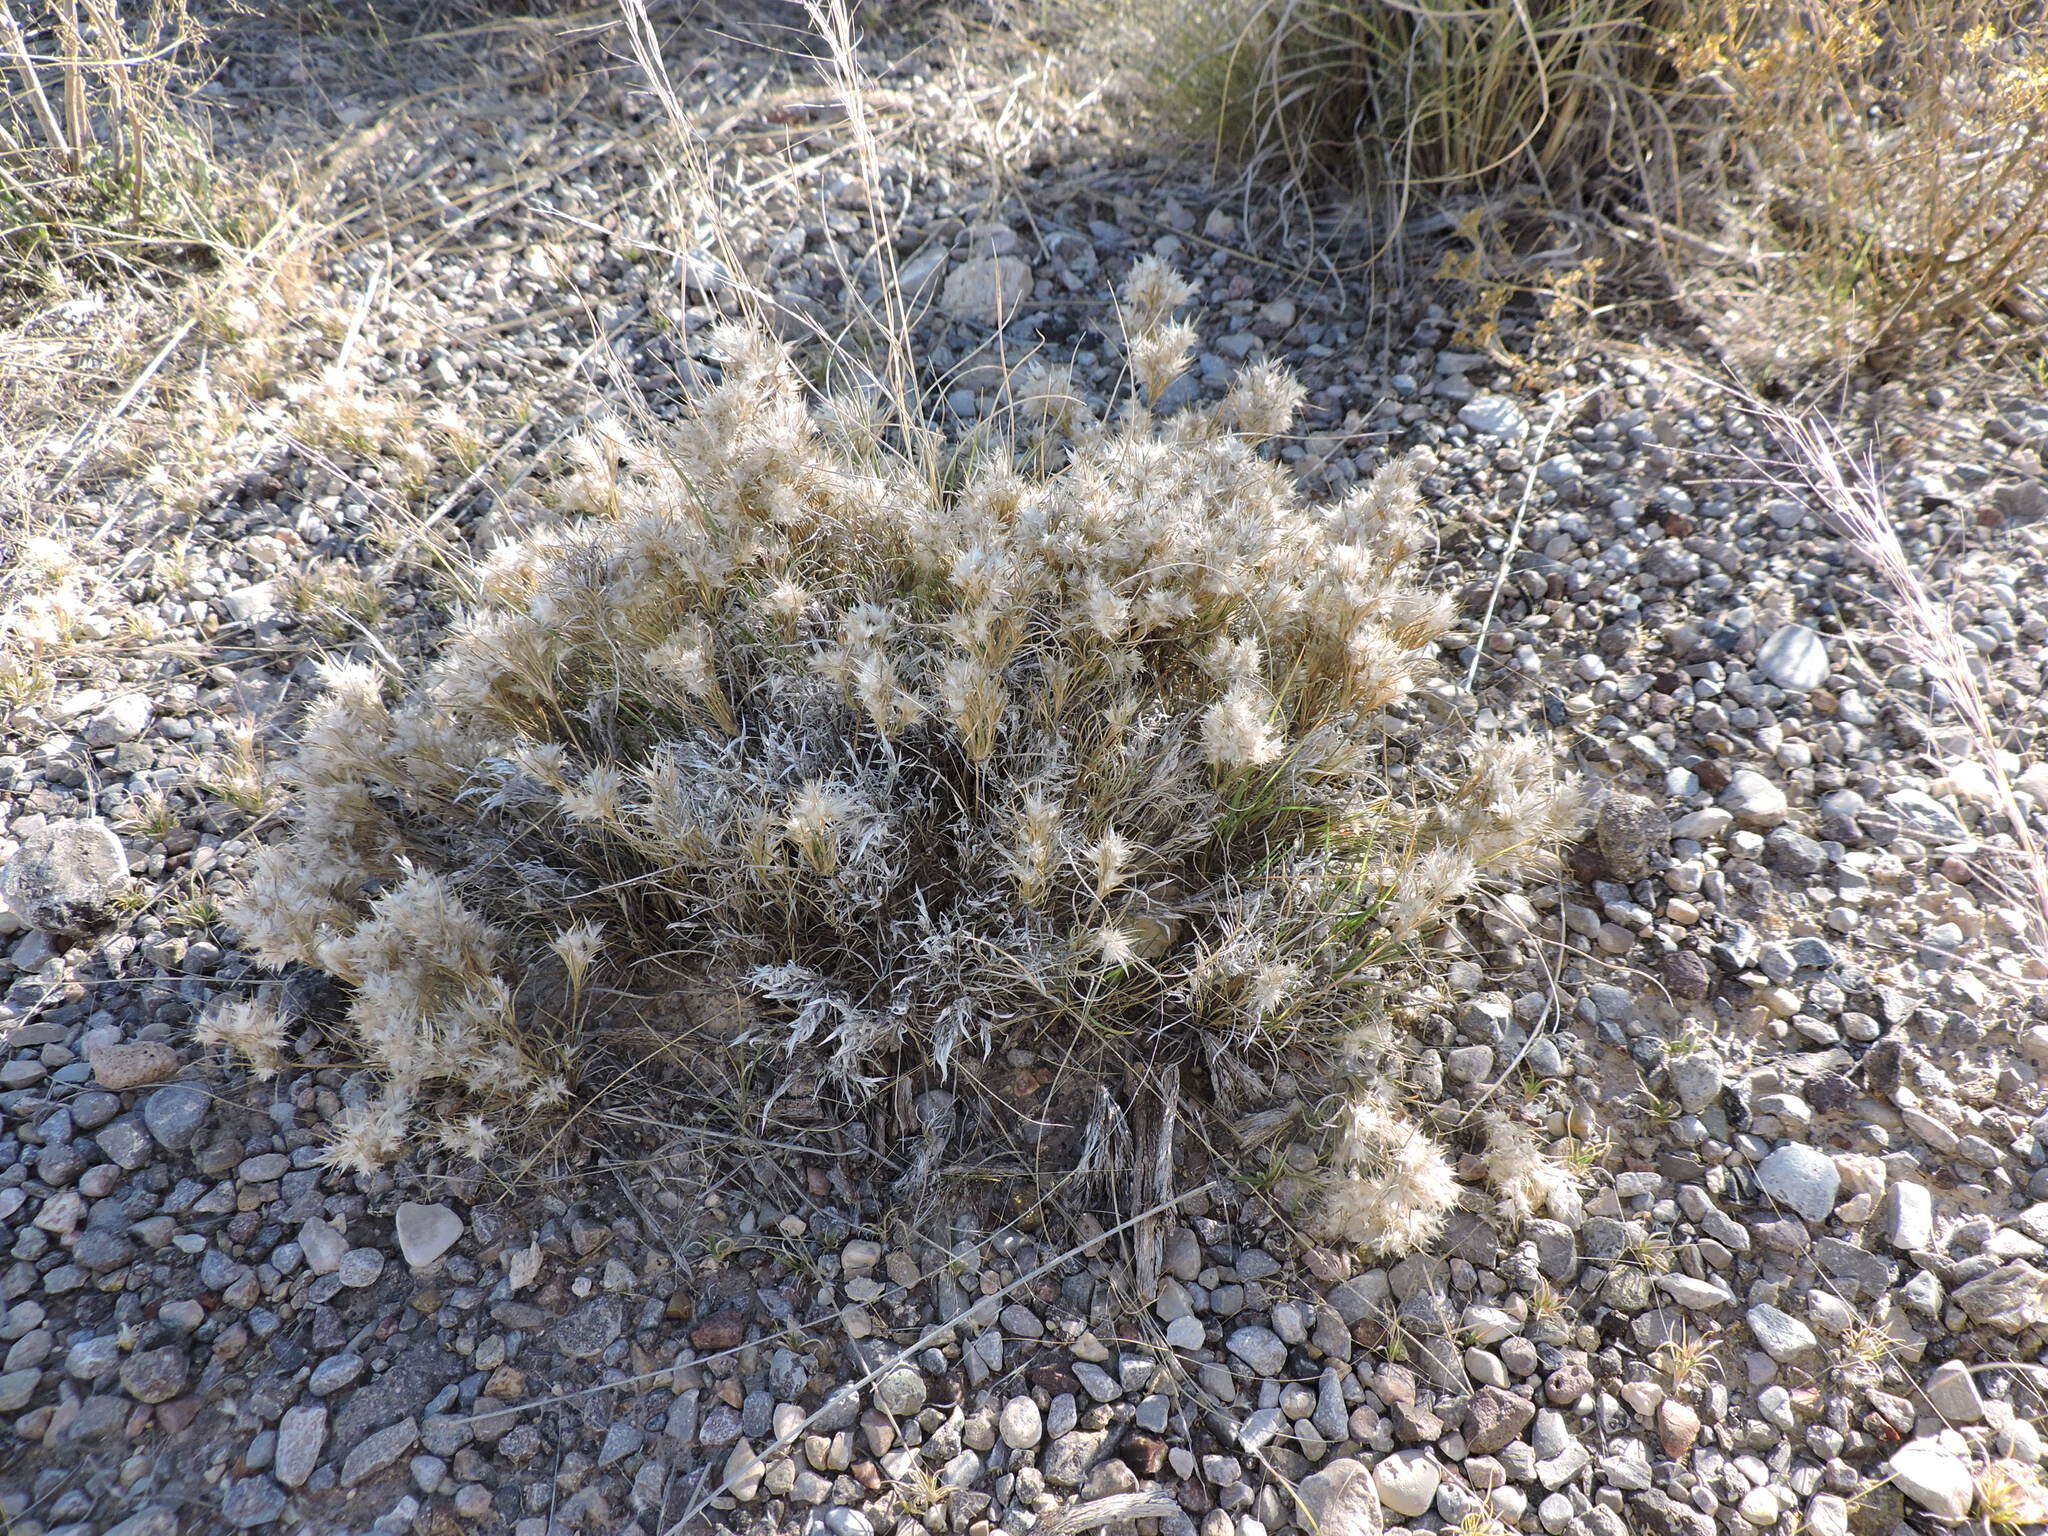 Image of low woollygrass